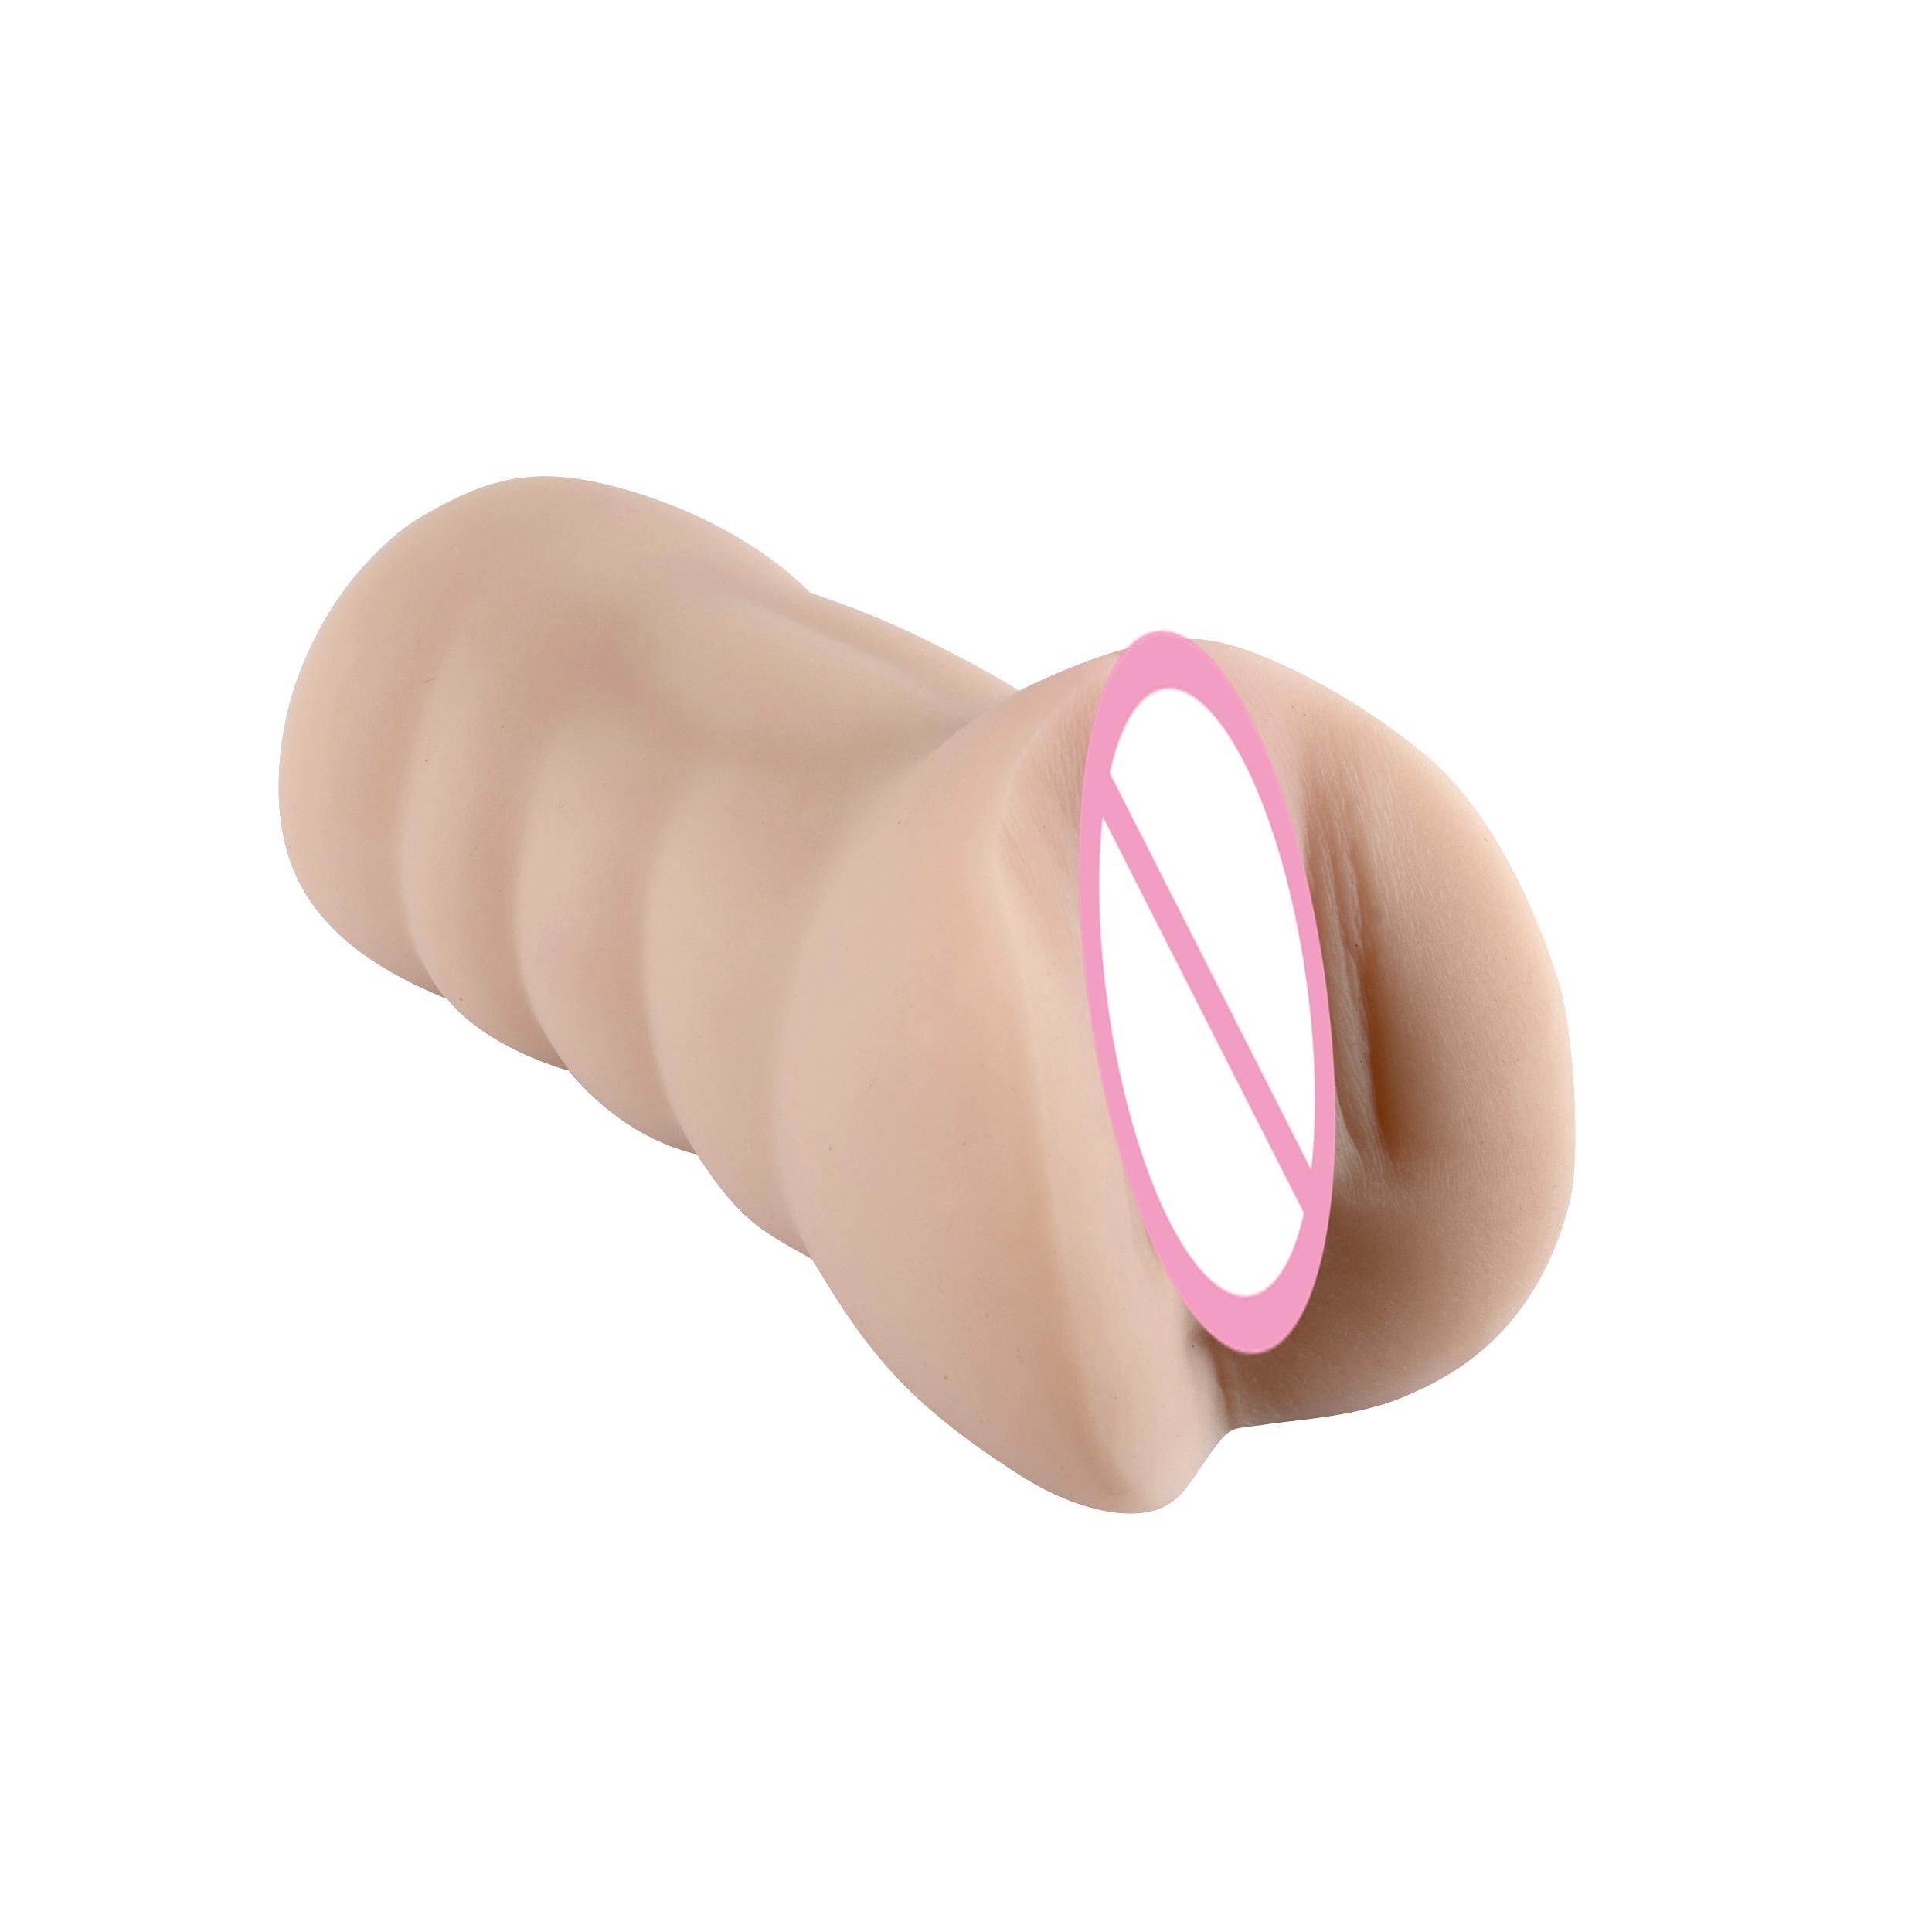  Realistic High Quality Vagina Masturbator For Male Orgasm Friction Simulation So Real And Exciting Original Factory